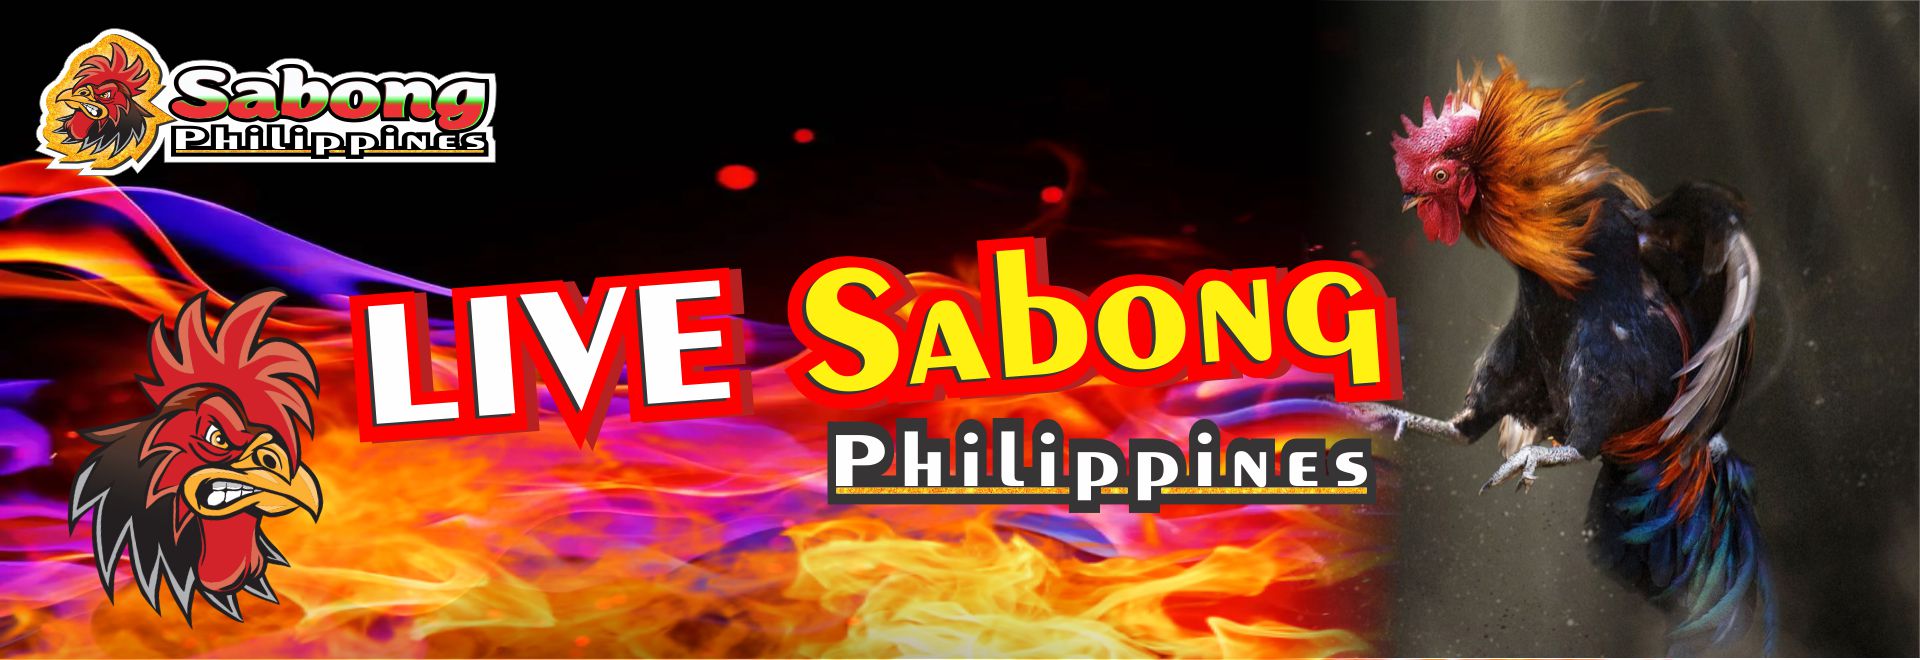 Live Sabong Philippines